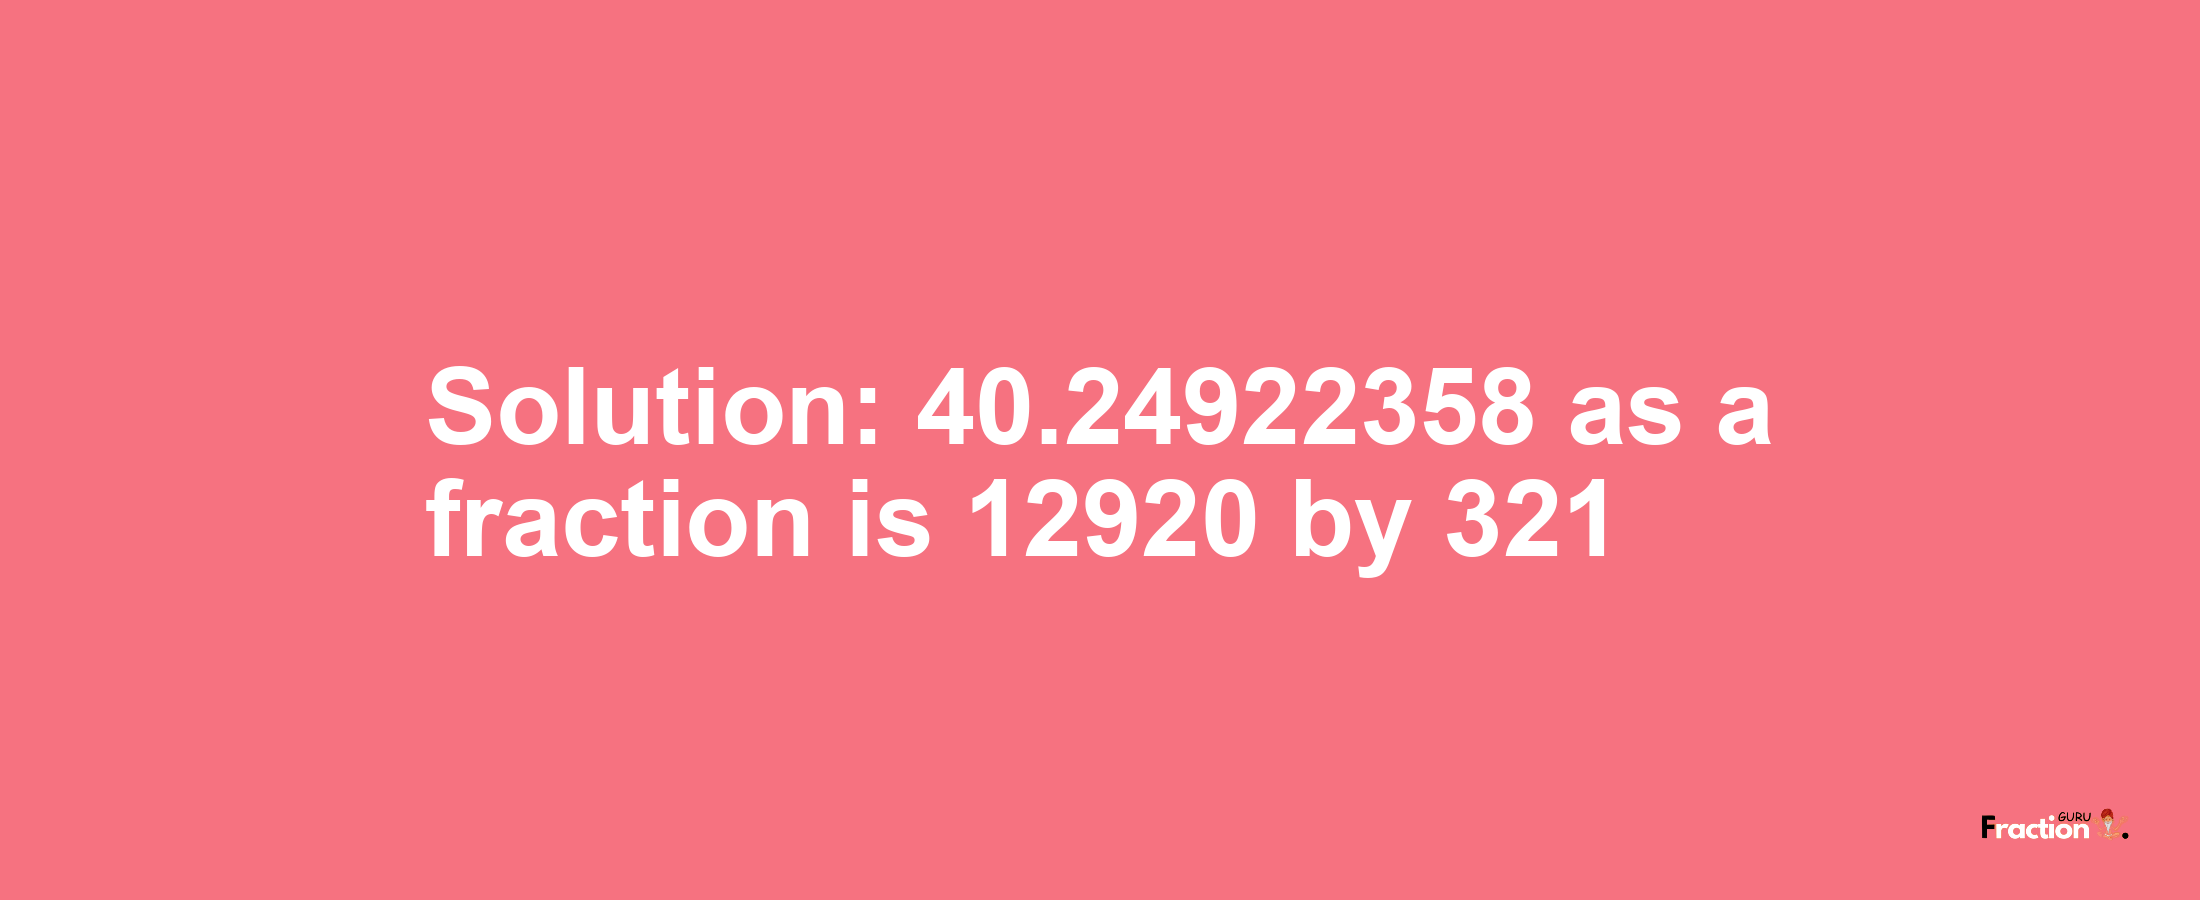 Solution:40.24922358 as a fraction is 12920/321